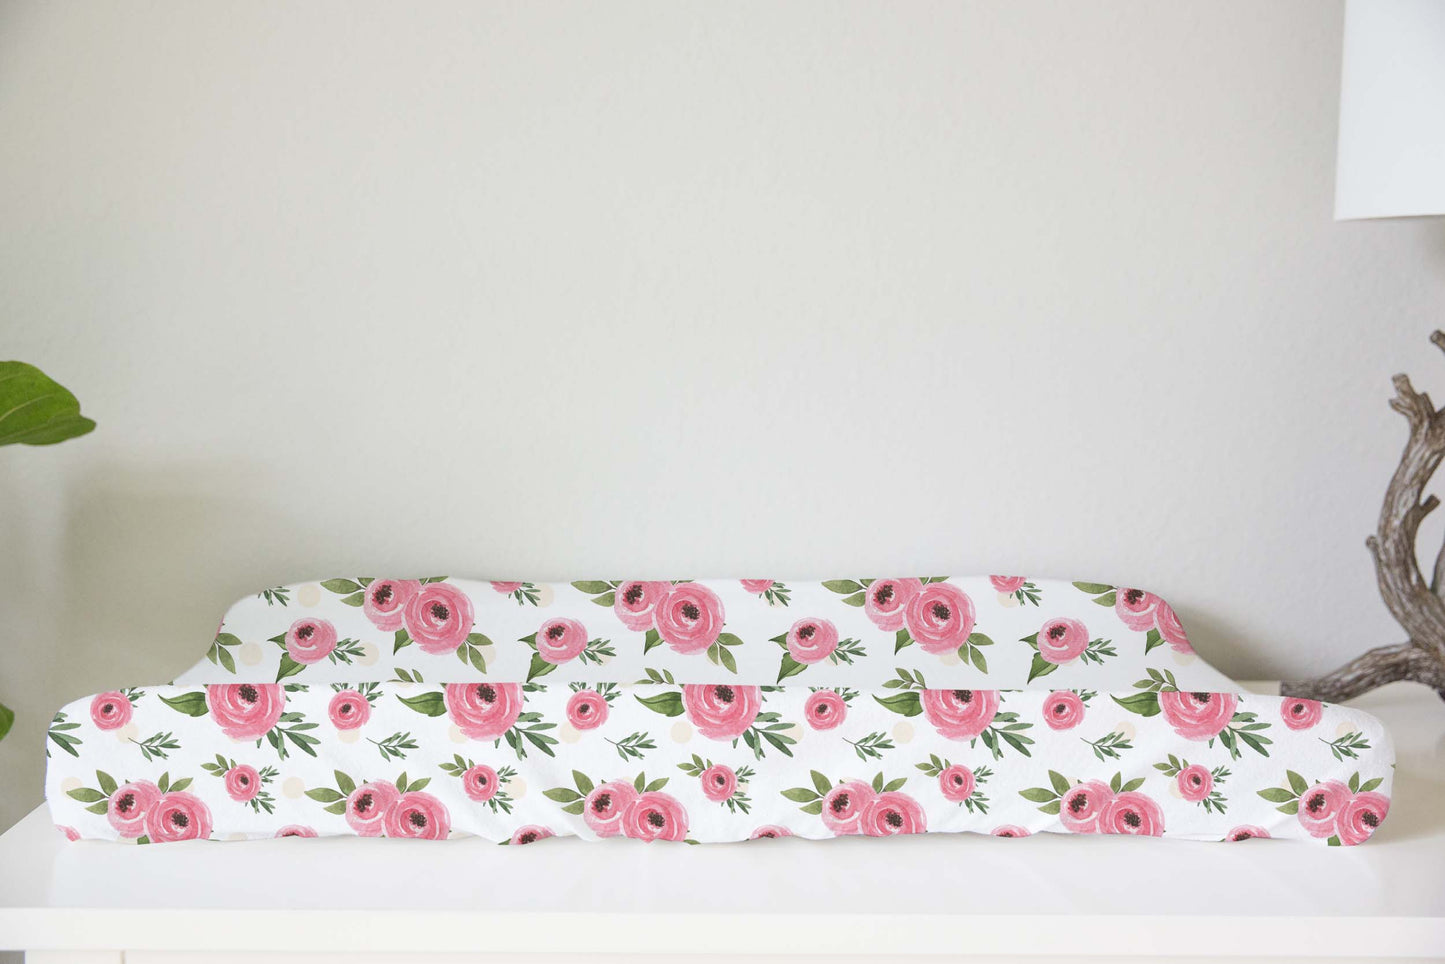 Floral Pink Changing Pad Cover, Pink Roses Nursery Bedding - Beary Pink